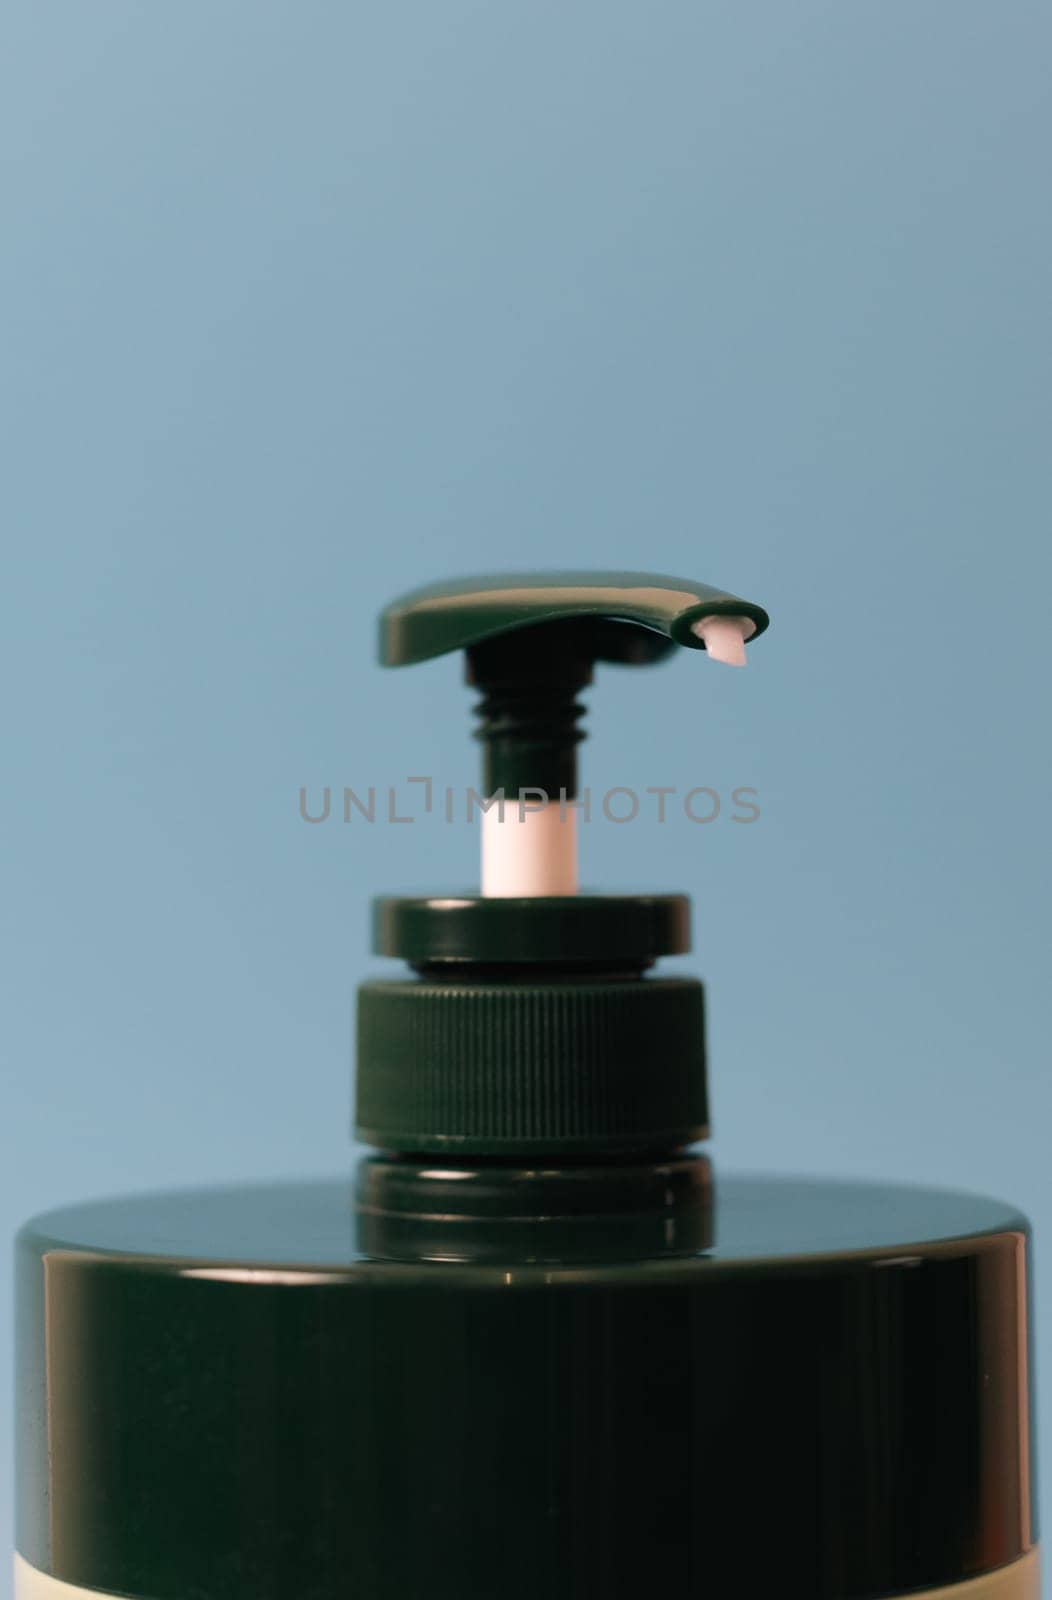 One bottle of green natural shampoo with a dispenser on a blue background, close-up side view. The concept of personal hygiene, cosmetics, beauty.